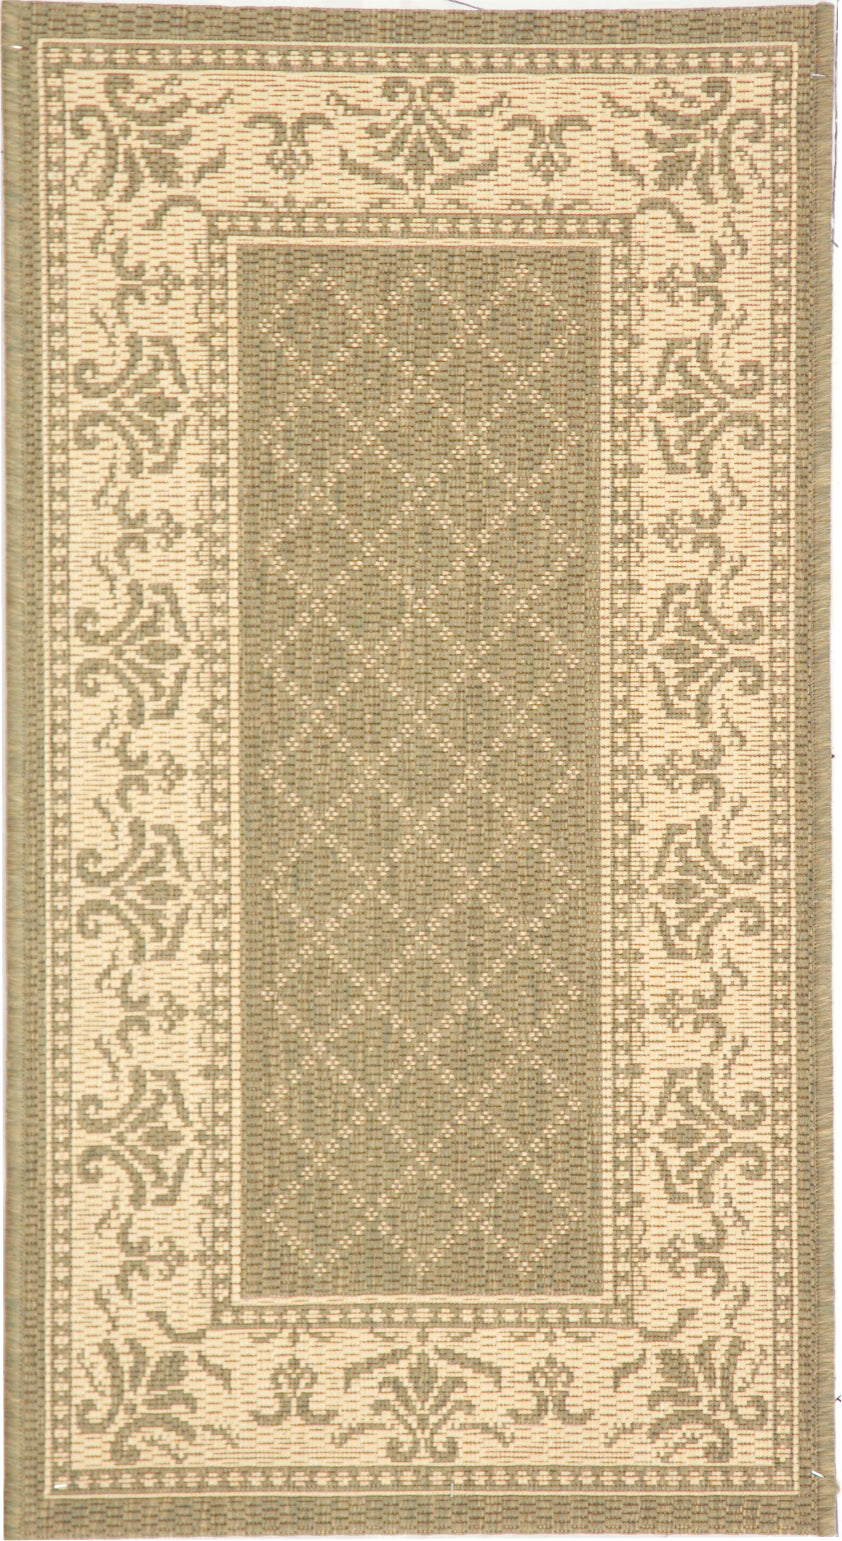 Safavieh Courtyard CY0901 Olive/Natural Area Rug main image